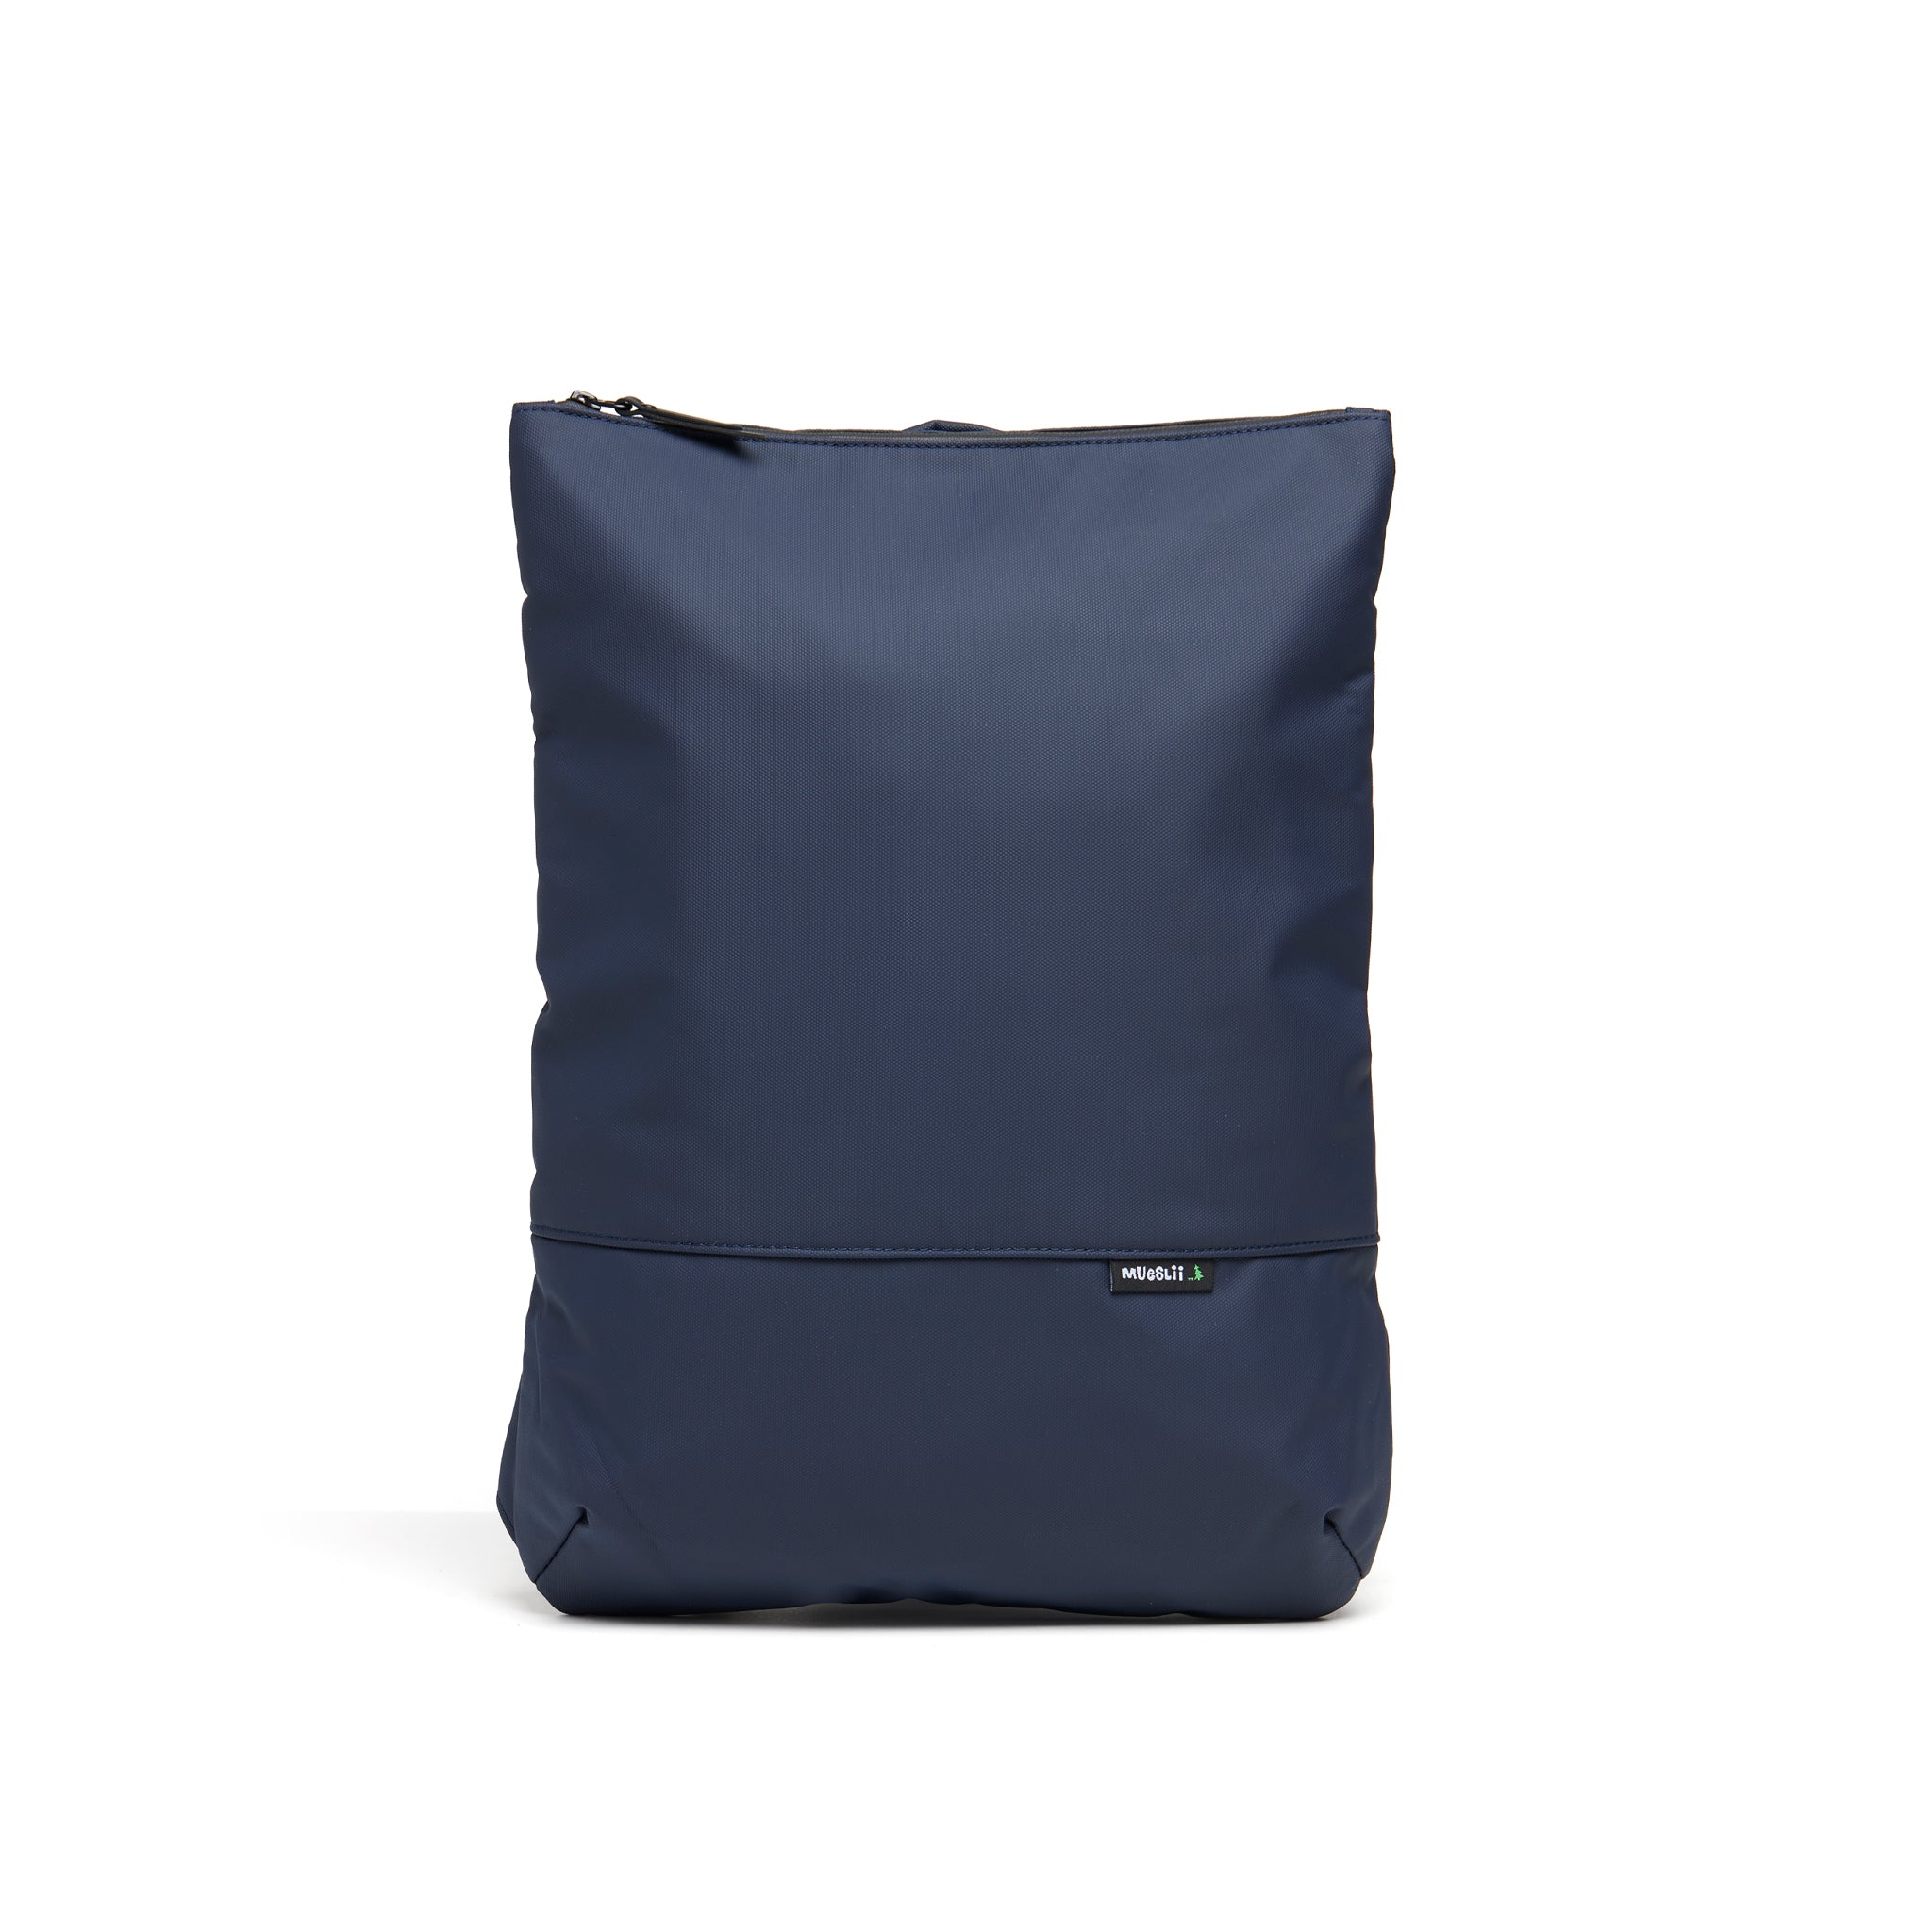 Mueslii light pack,  made of PU coated waterproof nylon, color midnight blue, front view.